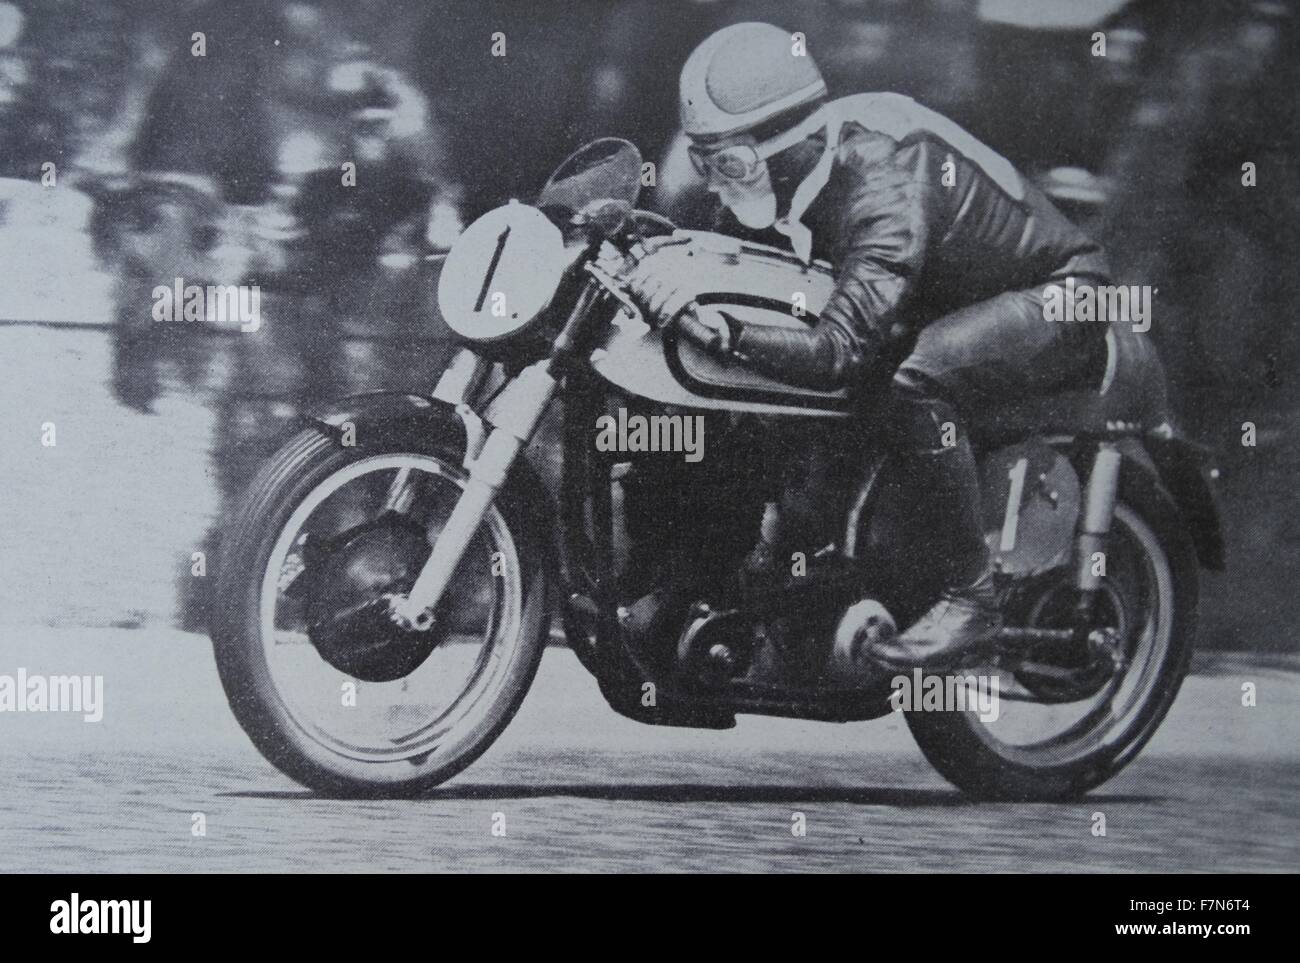 Geoffrey Ernest Duke OBE (born 29 March 1923) is a British multi-time motorcycle Grand Prix road racing world champion. He was born in St. Helens, Lancashire. 1950 Stock Photo